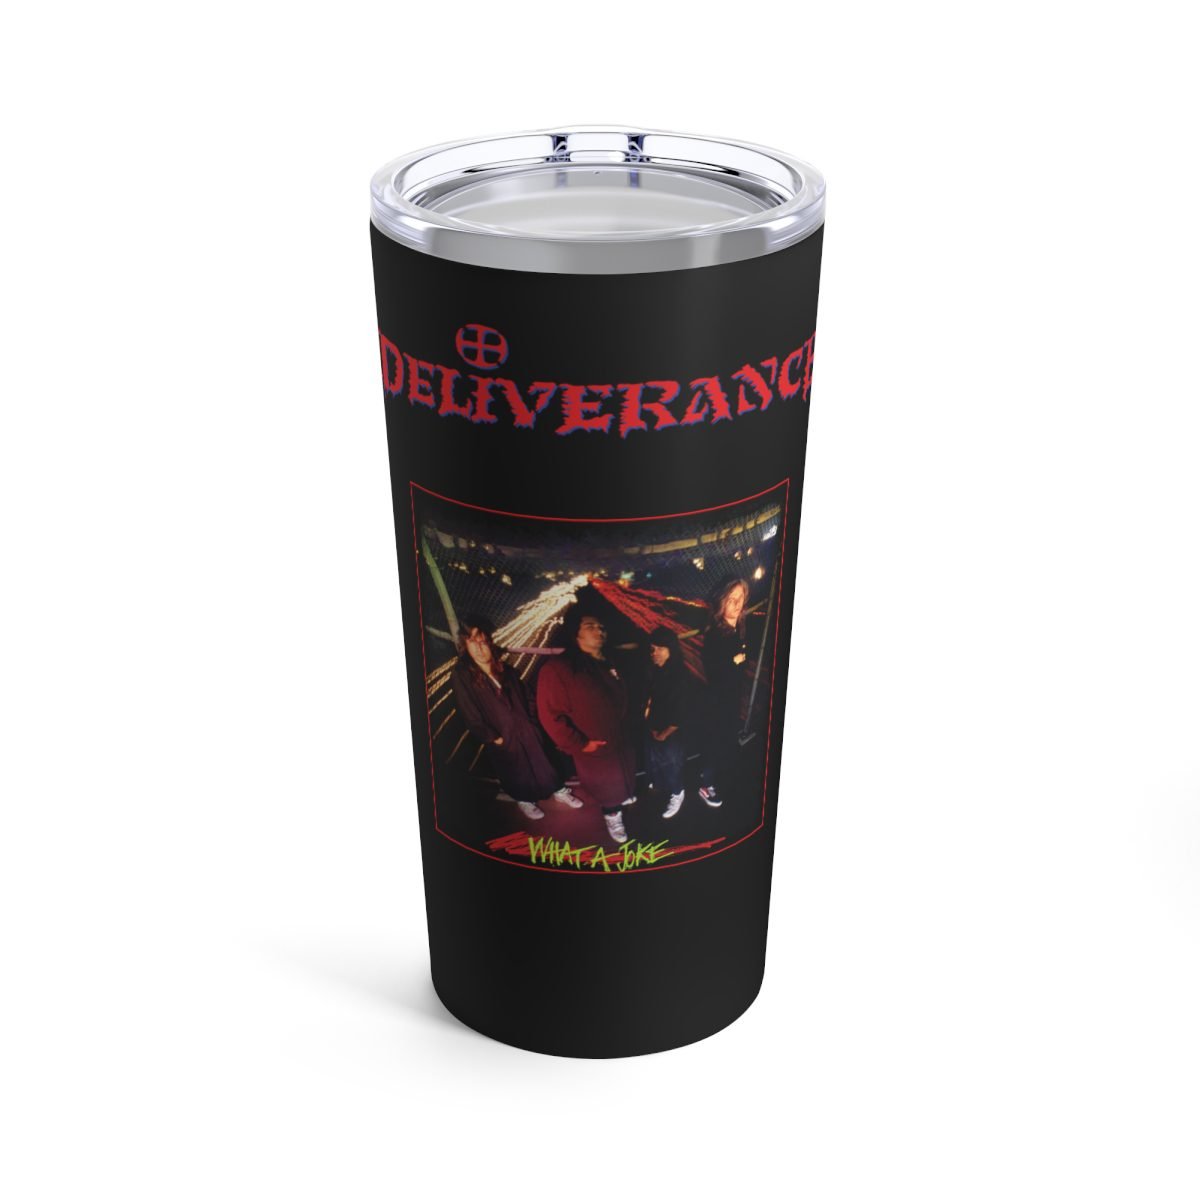 Deliverance – What a Joke 20oz Stainless Steel Tumbler